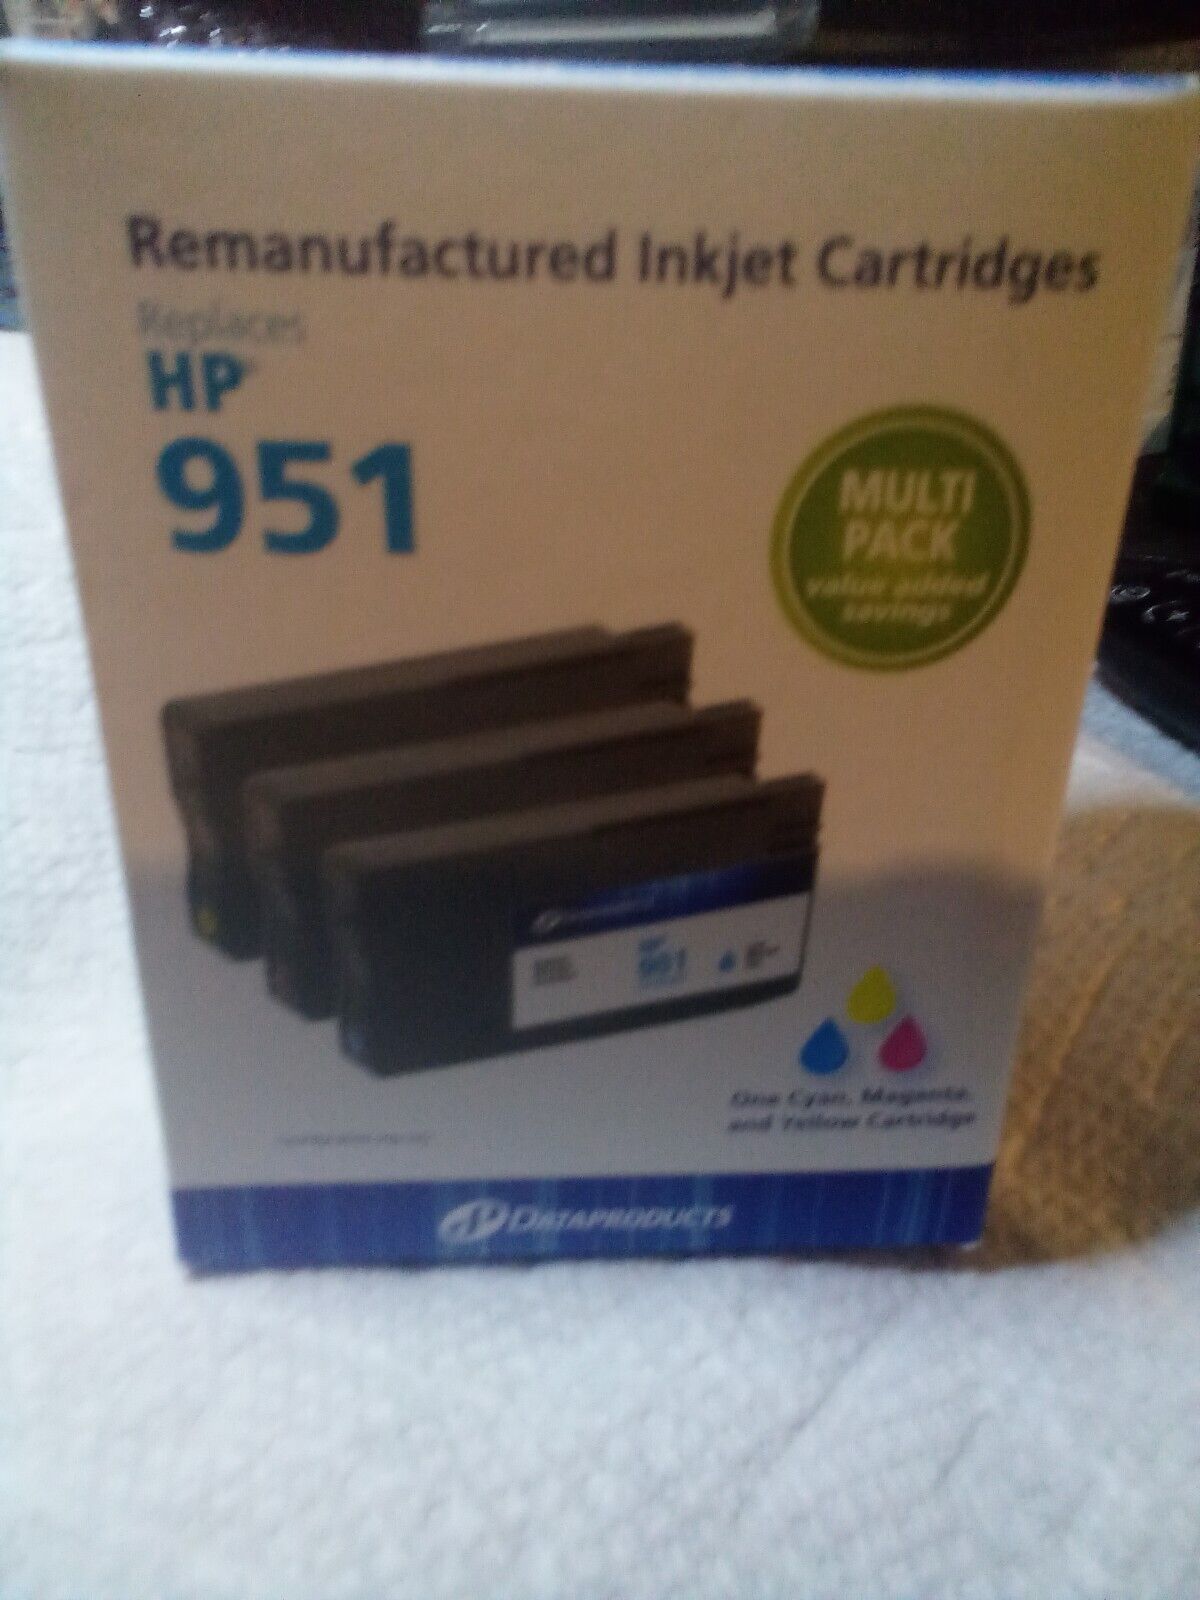 Dataproducts DPC951MP  Inkjet Cartridge Replacements for HP 951 tri color